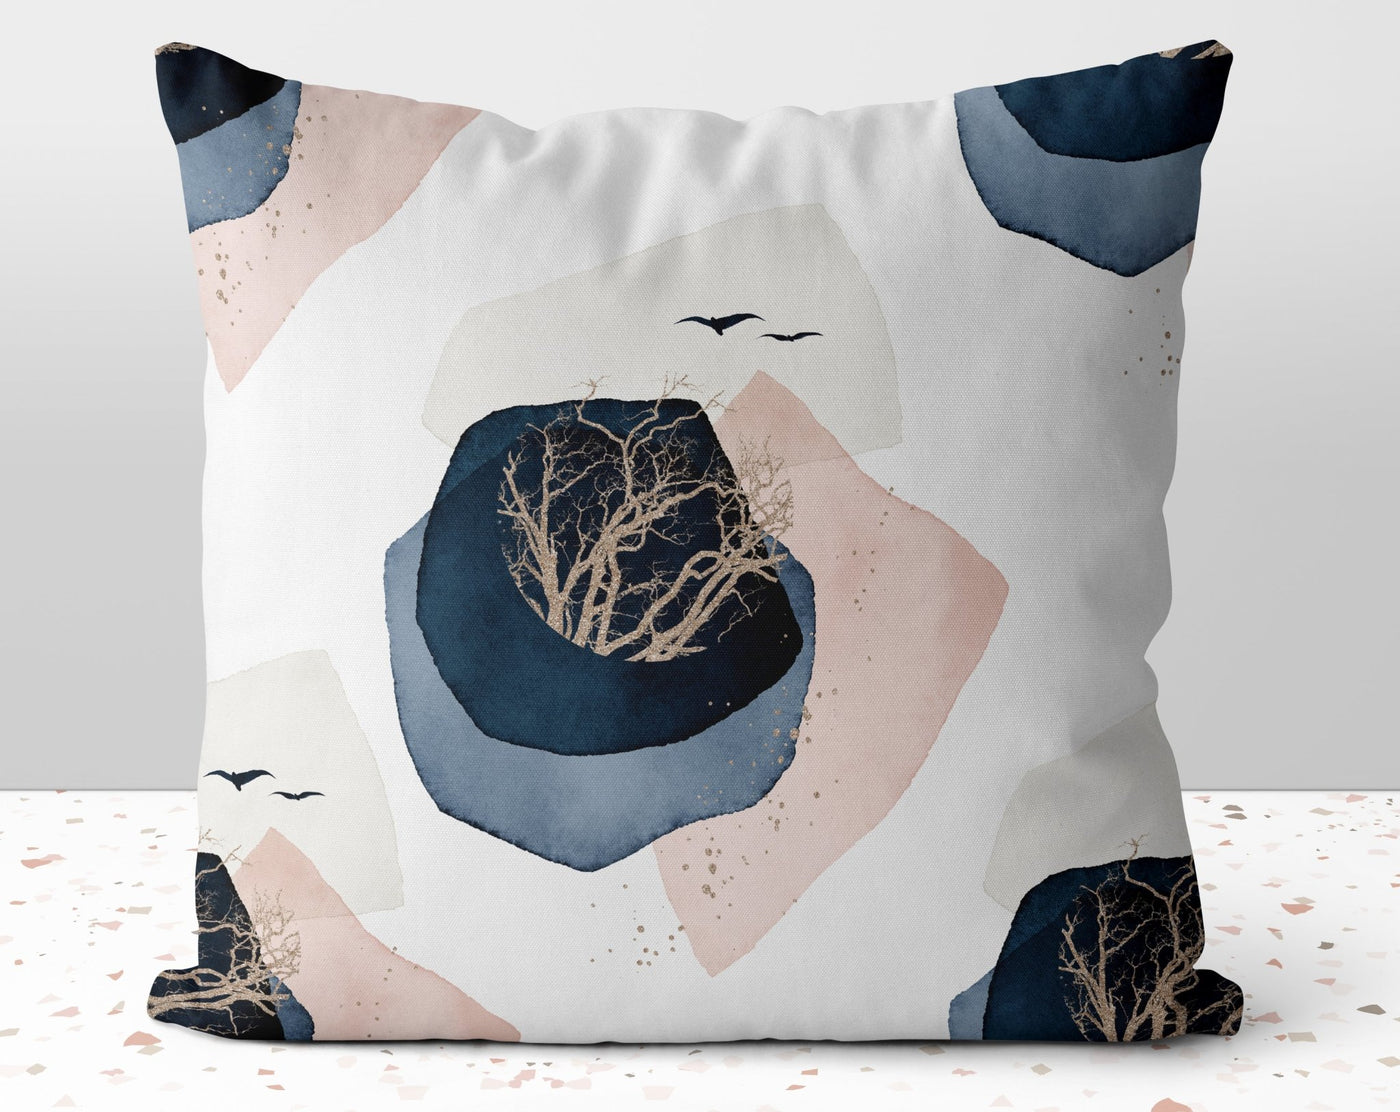 Abstract Birds and Branches Pillow Throw Cover with Insert - Cush Potato Pillows